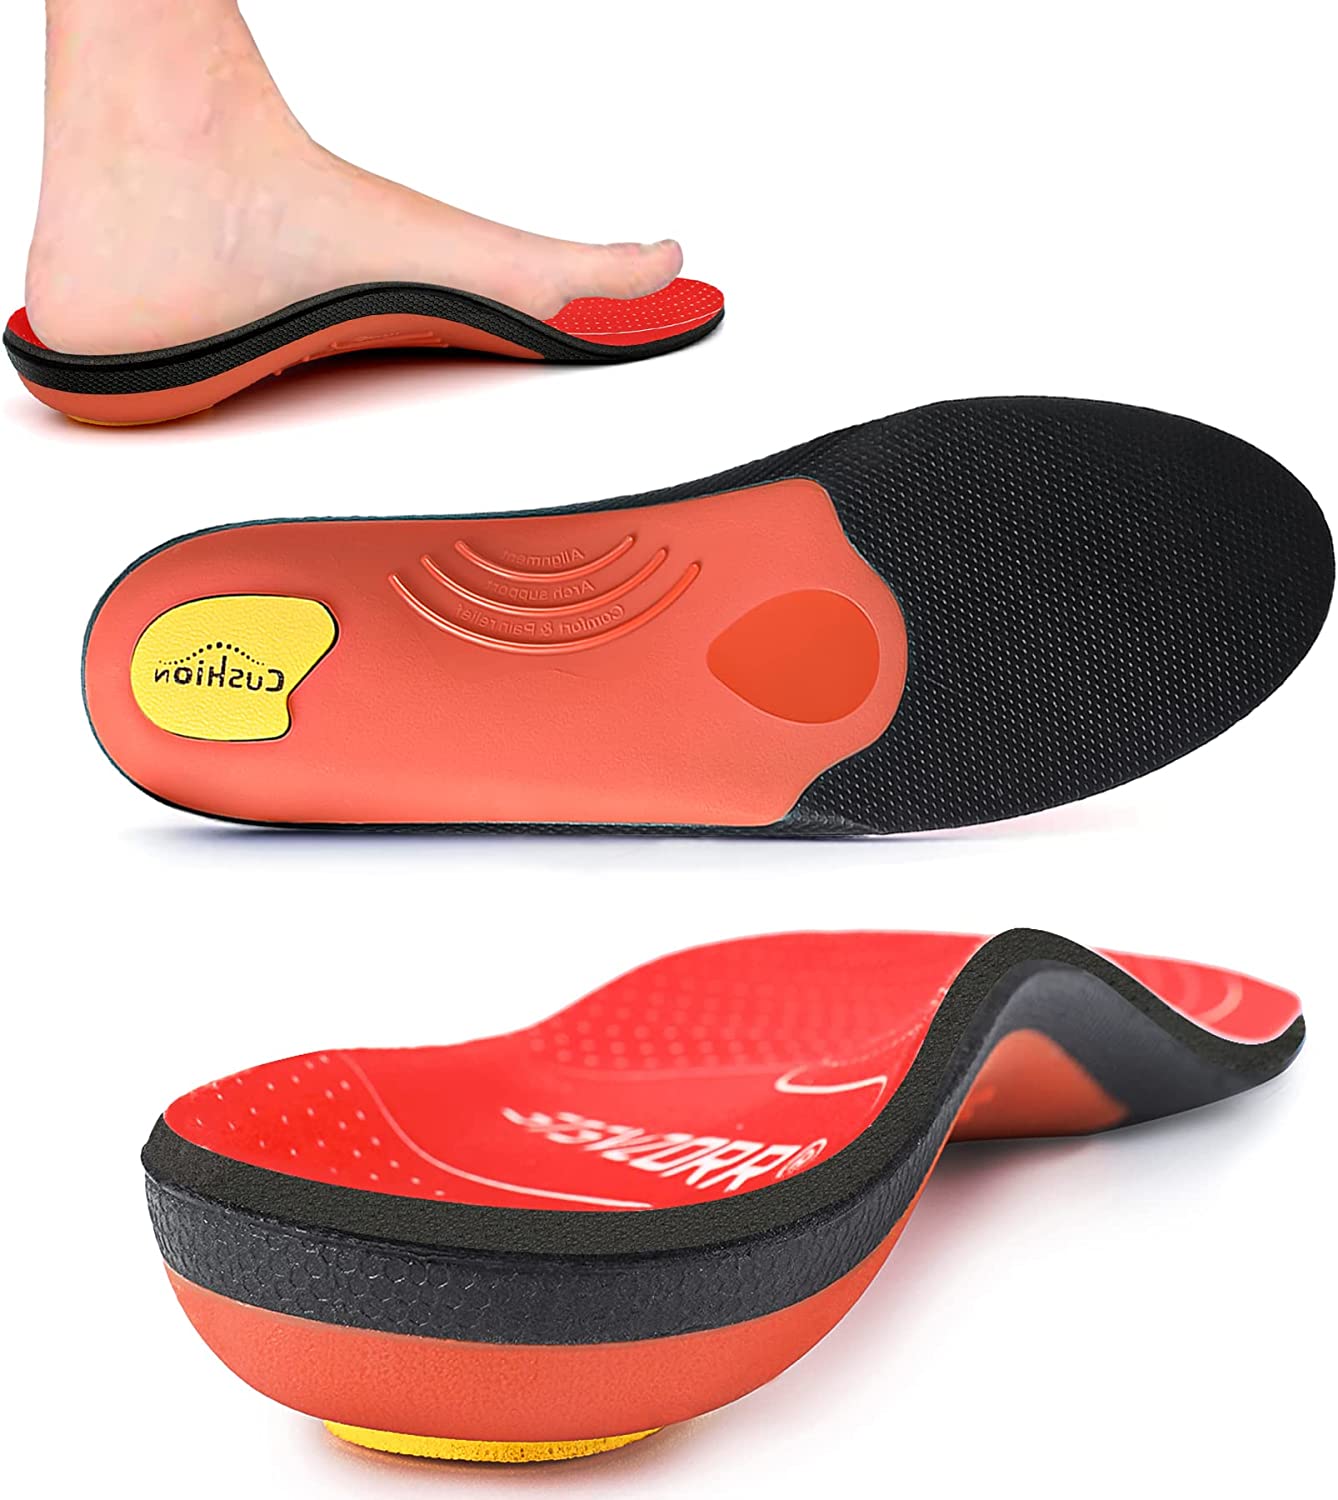 Arch Heavy Support Pain Relief Orthotics - 210+ lbs [...]